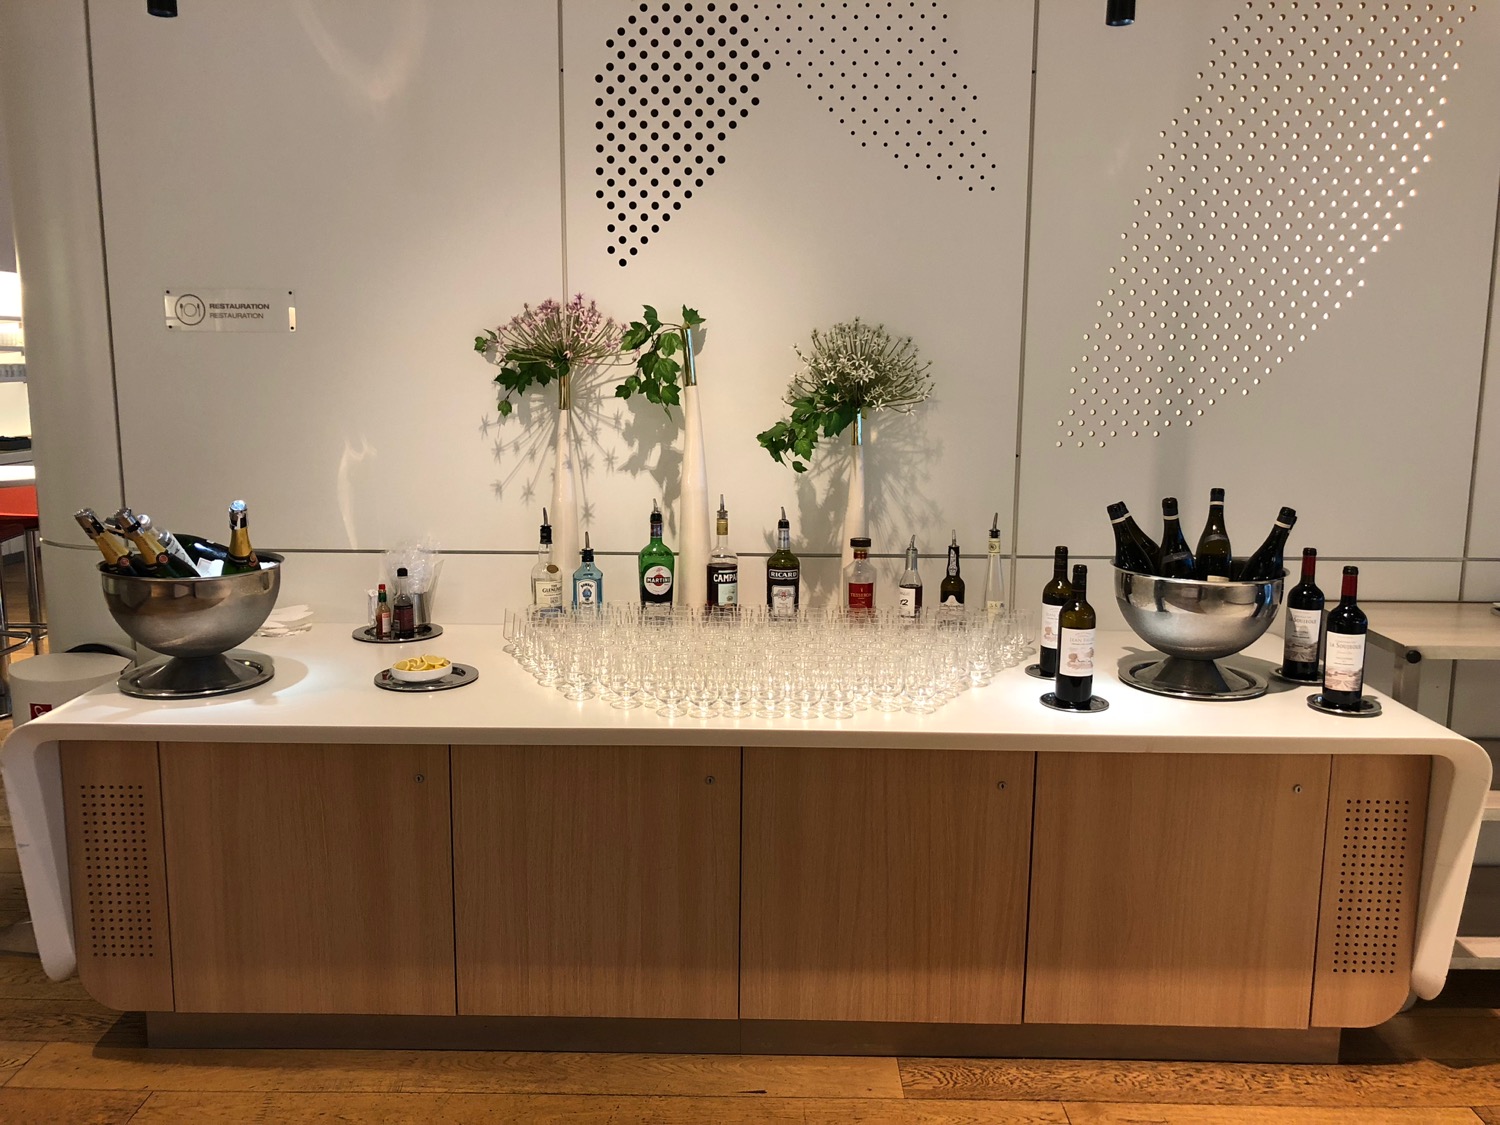 a table with bottles and glasses on it